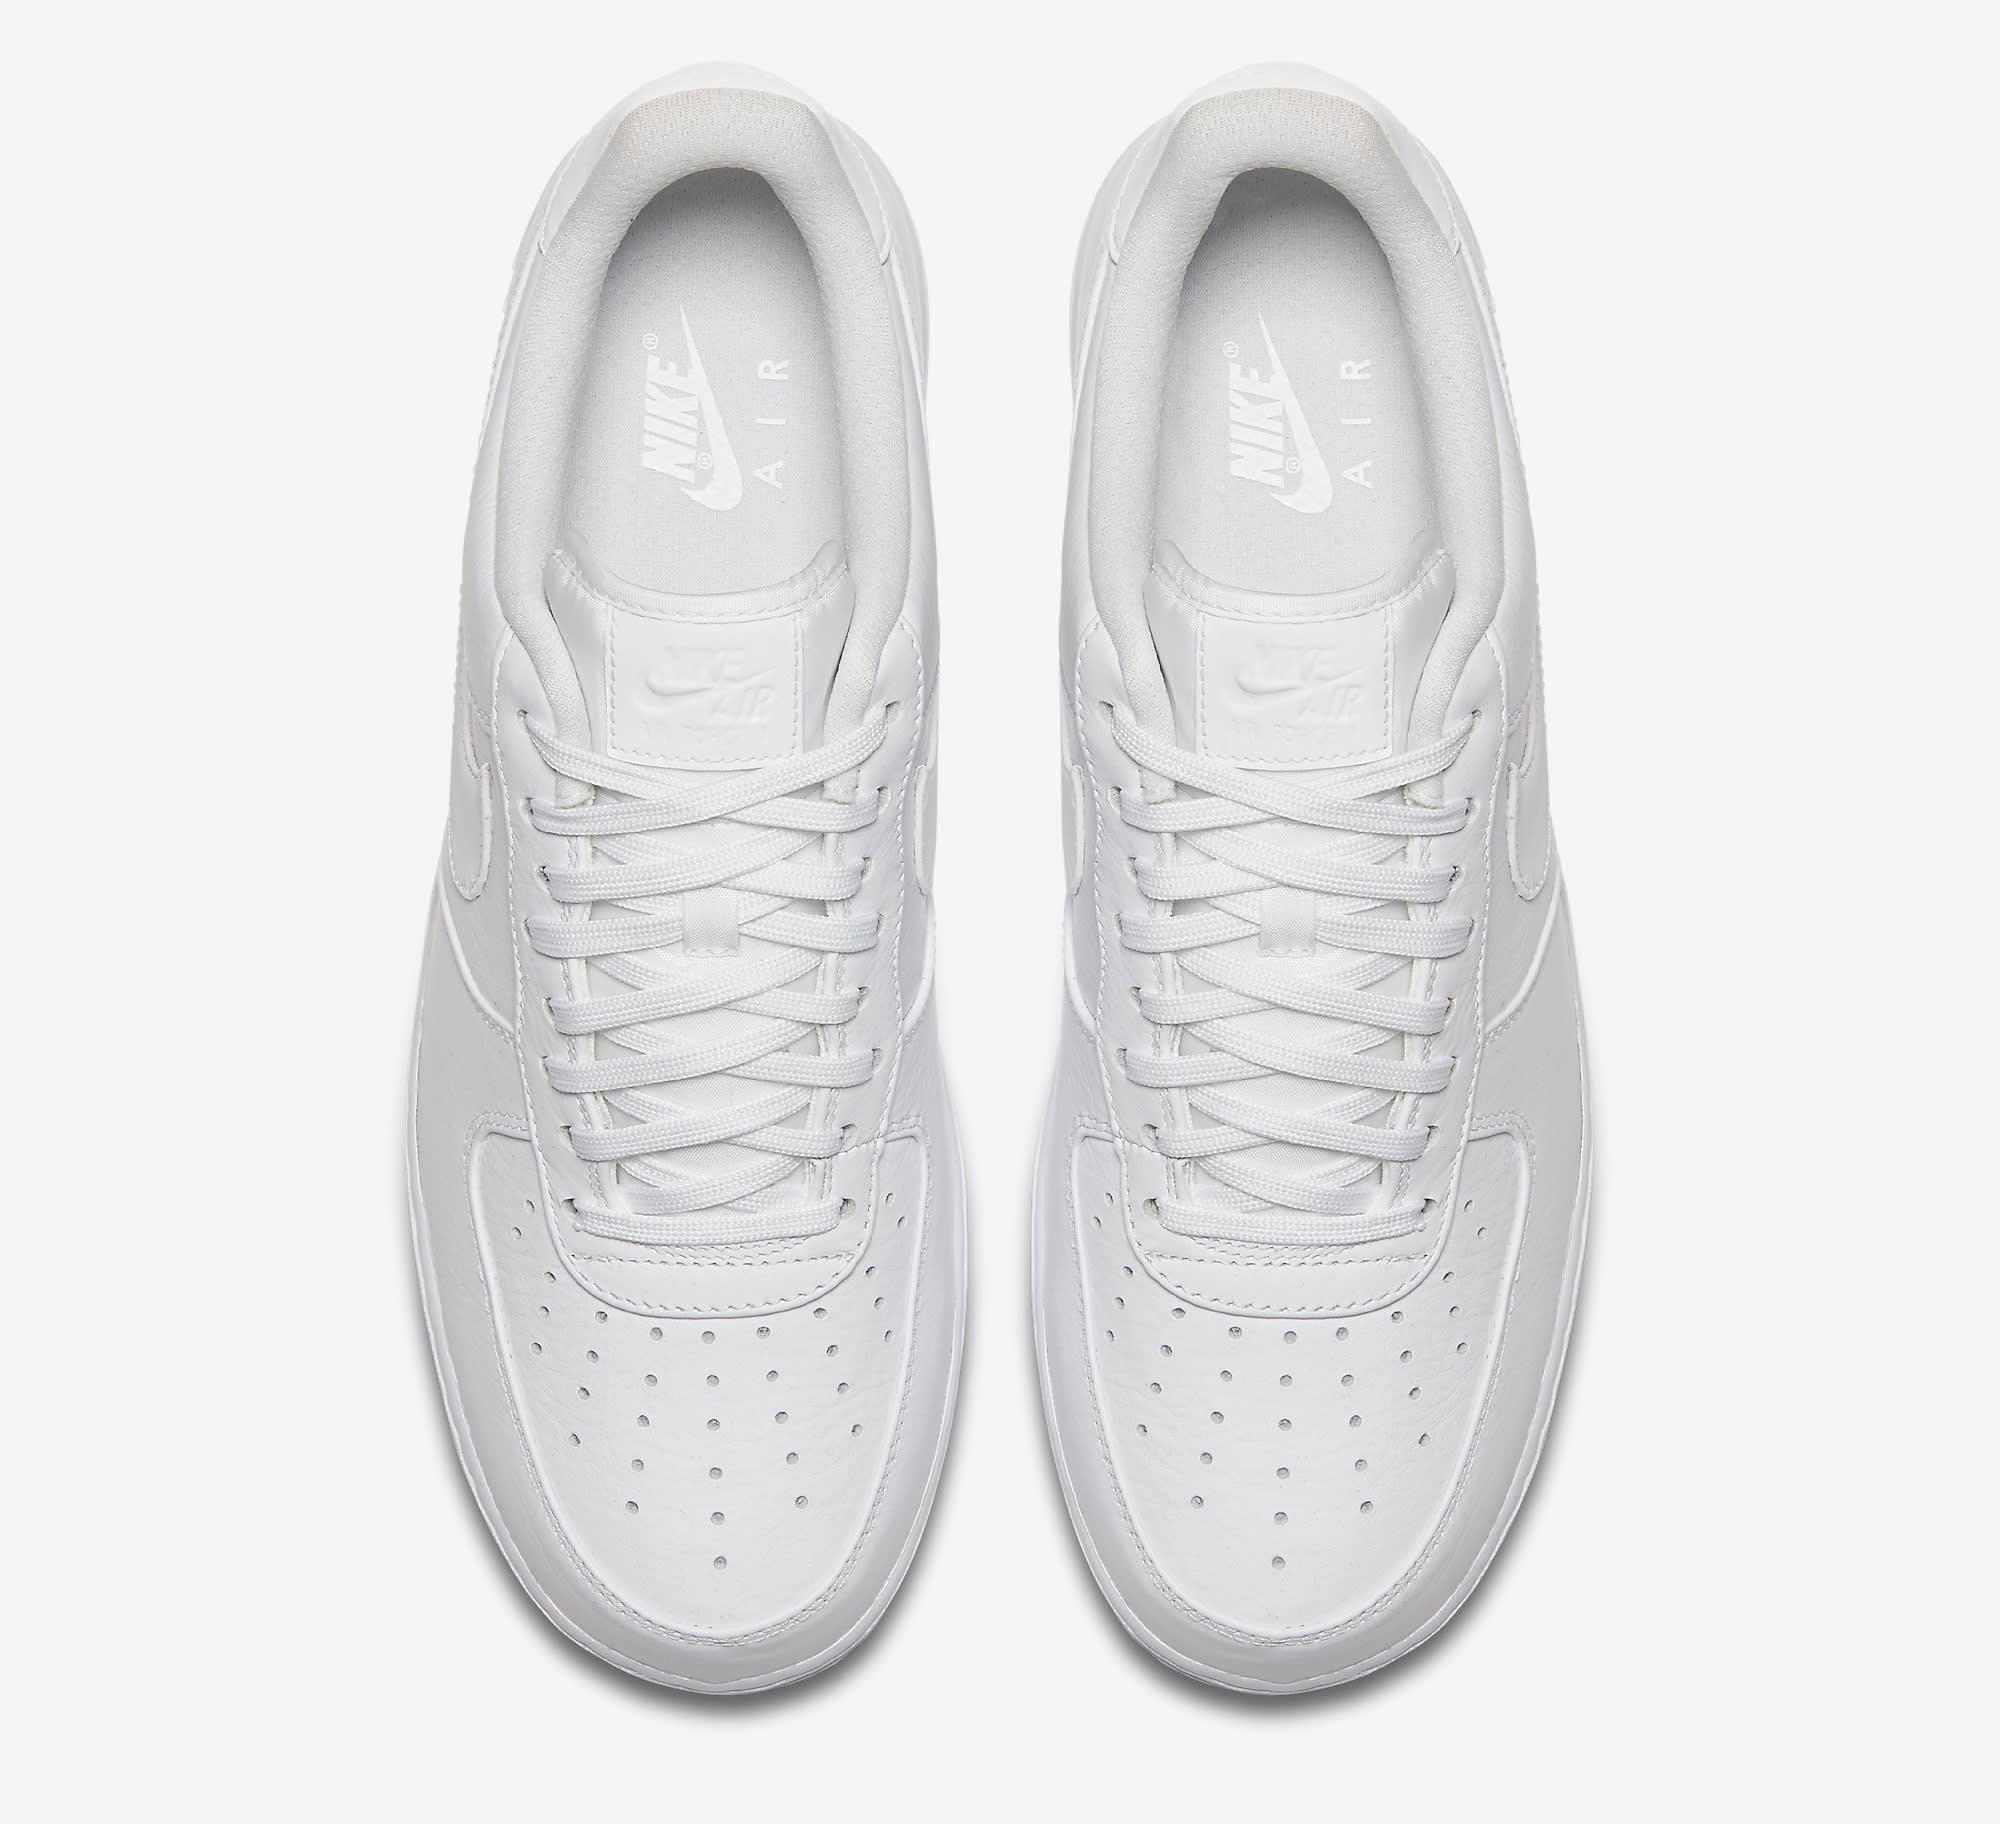 Nike Air Force 1 White Reflective 905345-100 Top